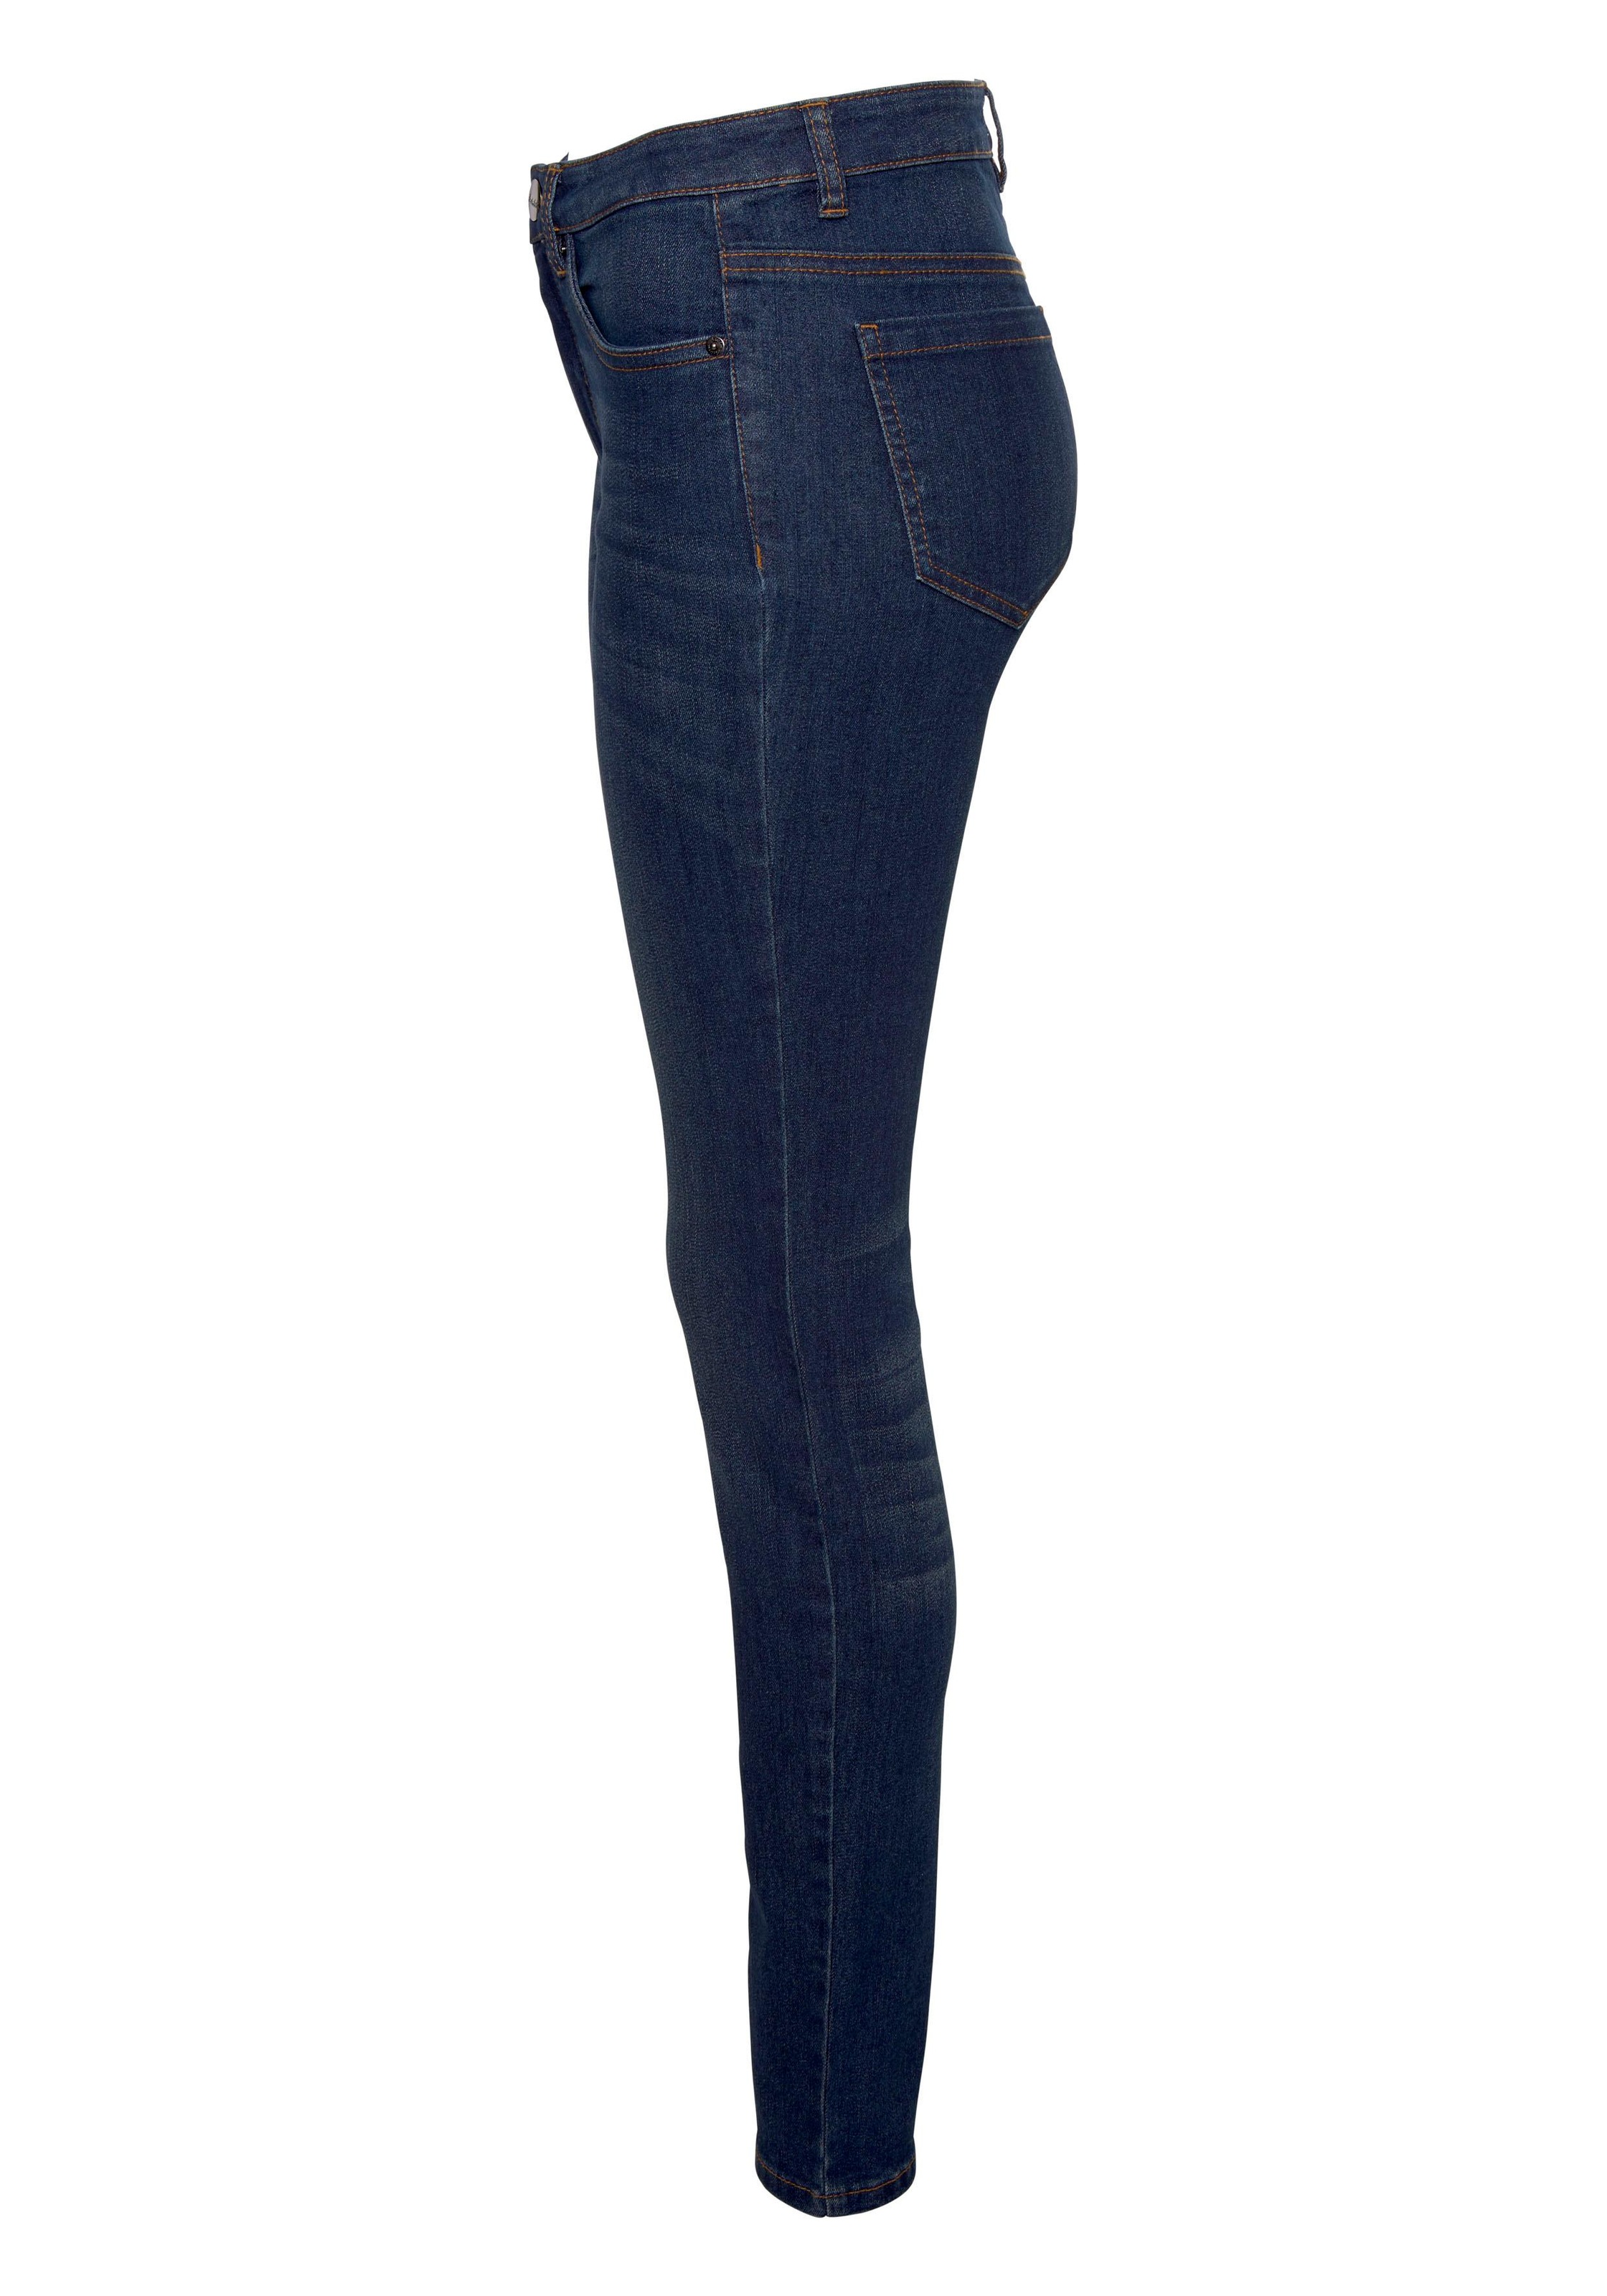 CASUAL ♕ Skinny-fit-Jeans, Aniston Regular-Waist bei